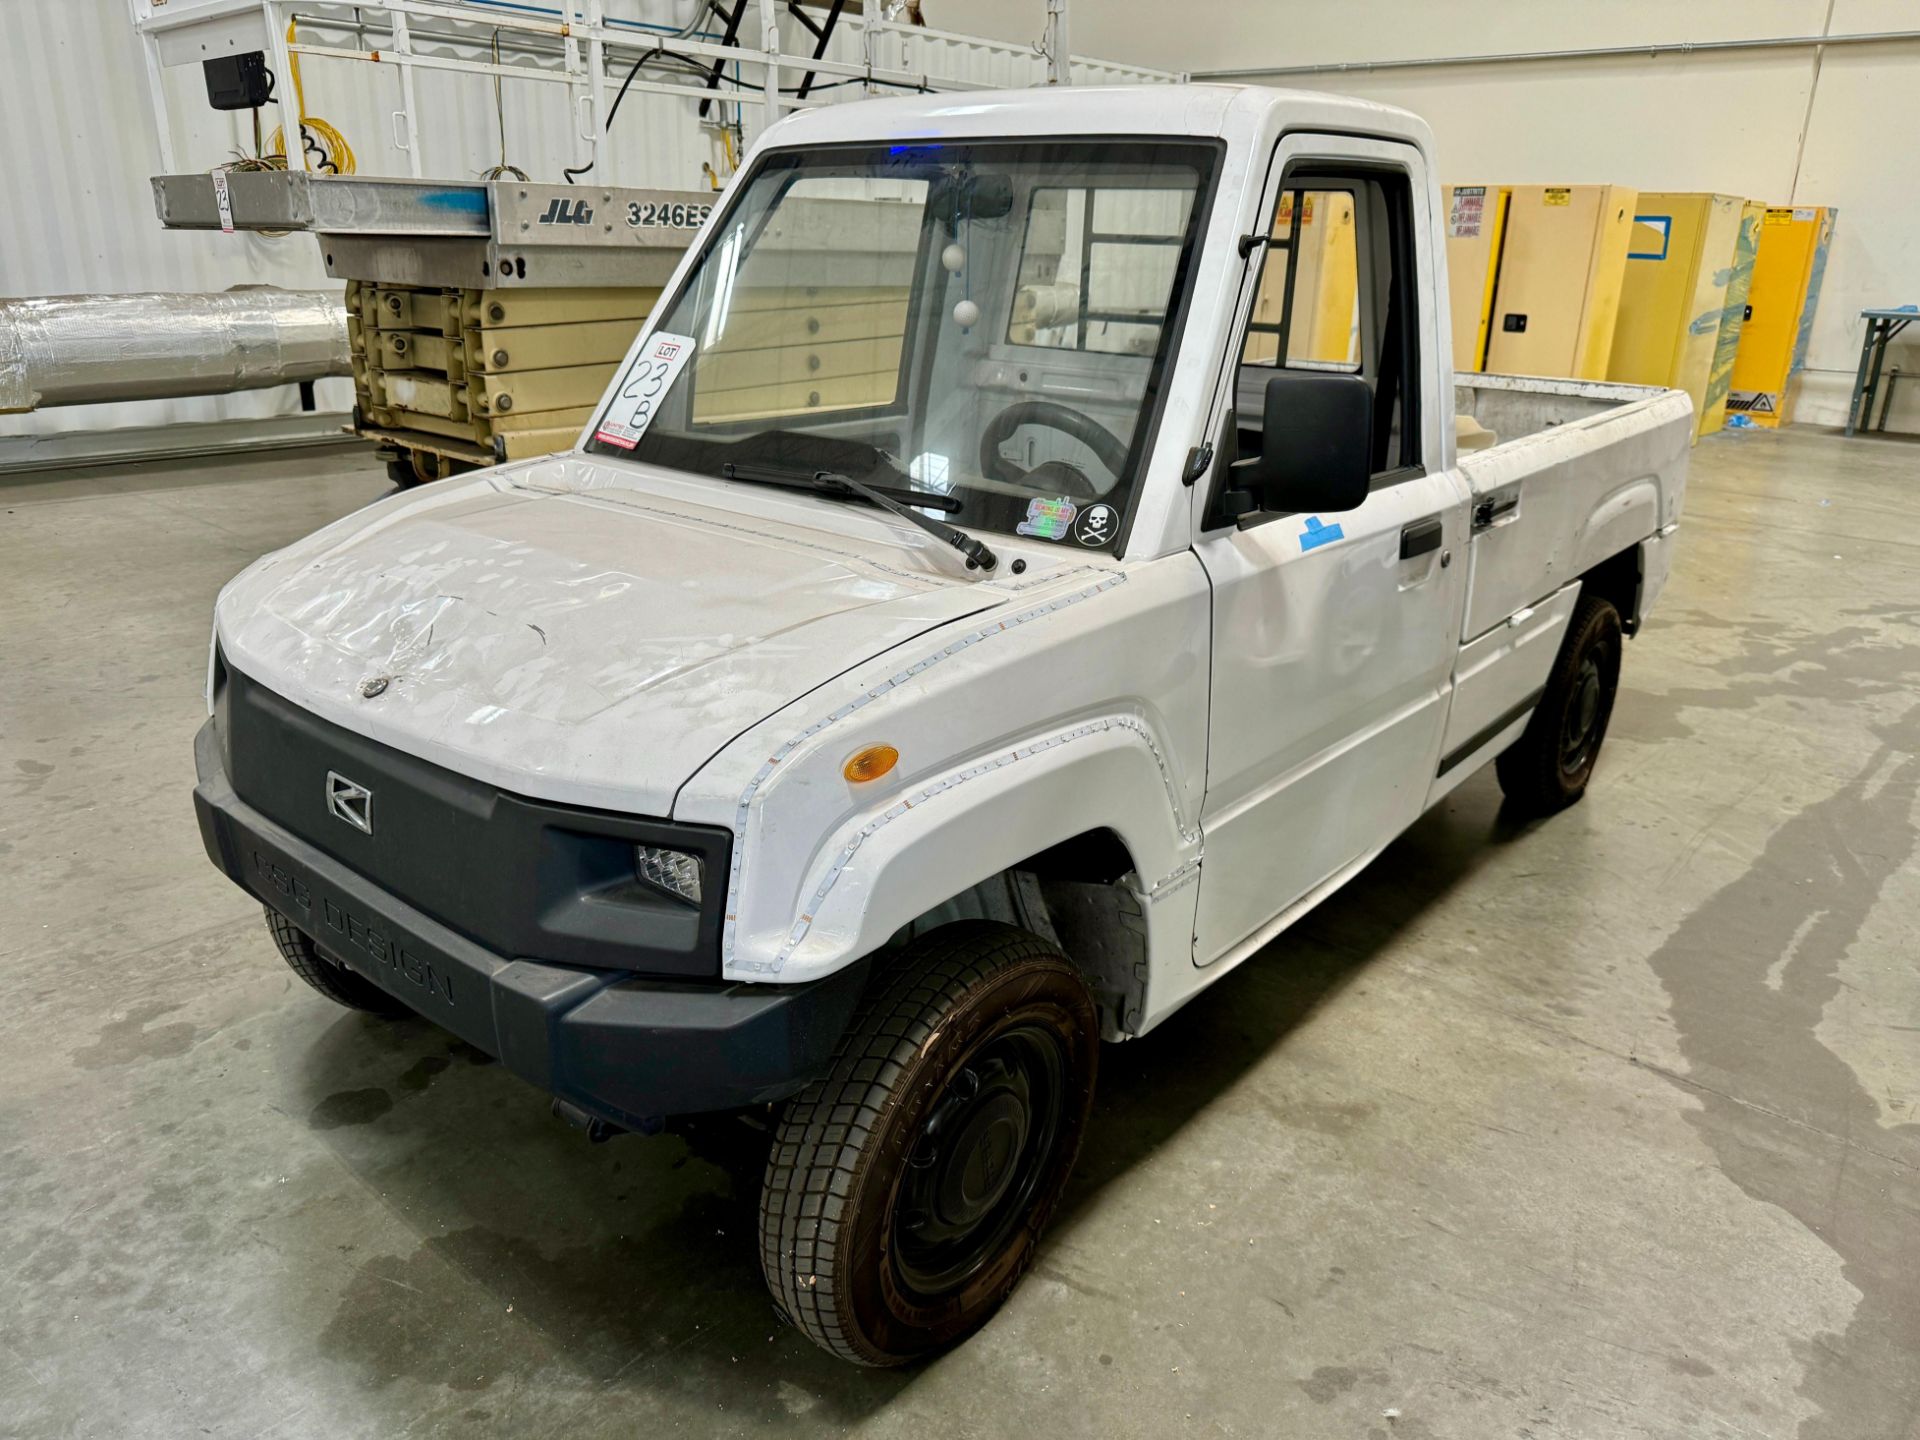 CSG DESIGN ELECTRIC UTILITY VEHICLE, OUT OF SERVICE/MAY NEED BATTERIES